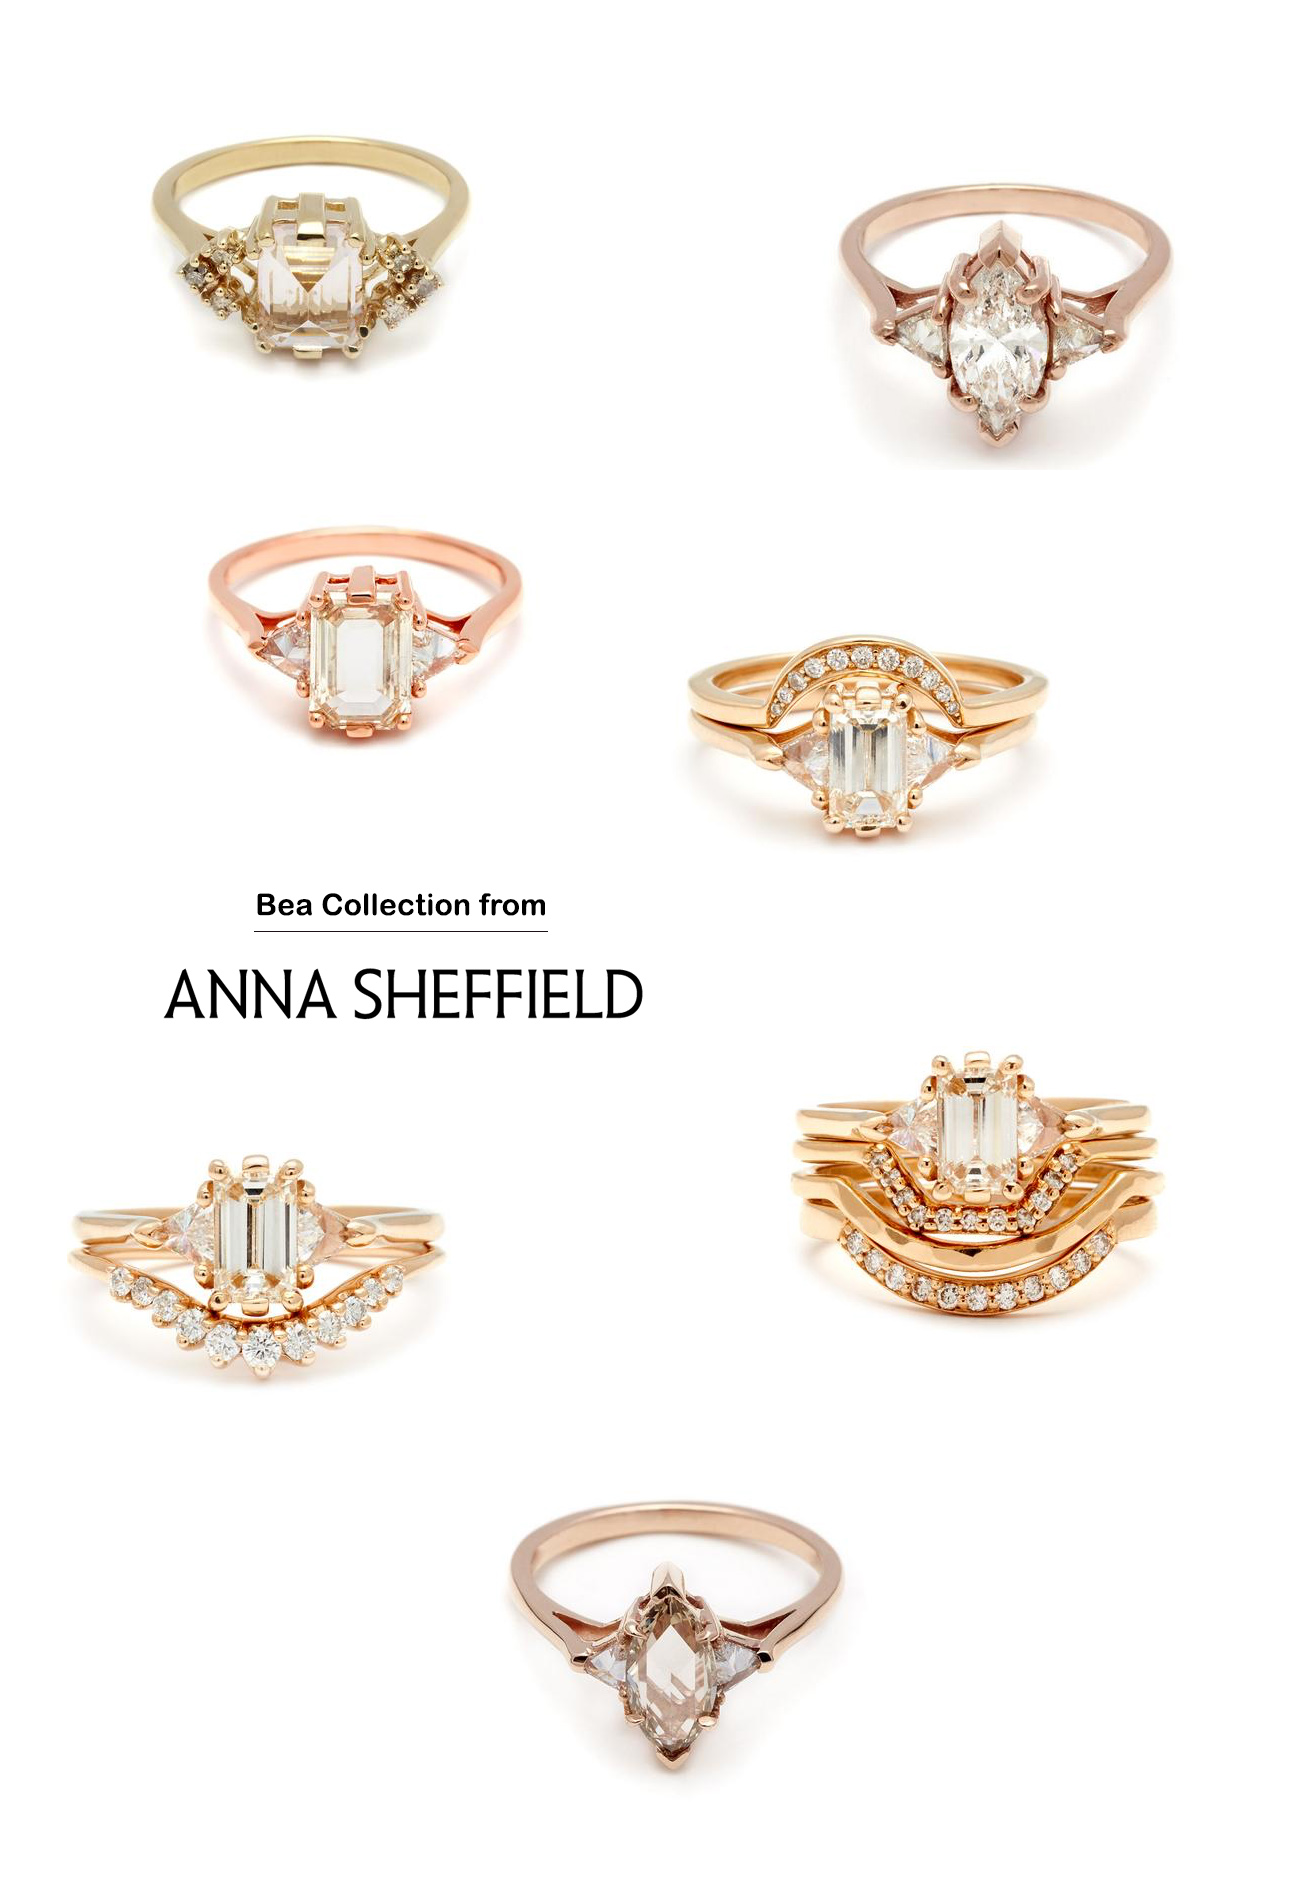 Anna Sheffield engagement rings